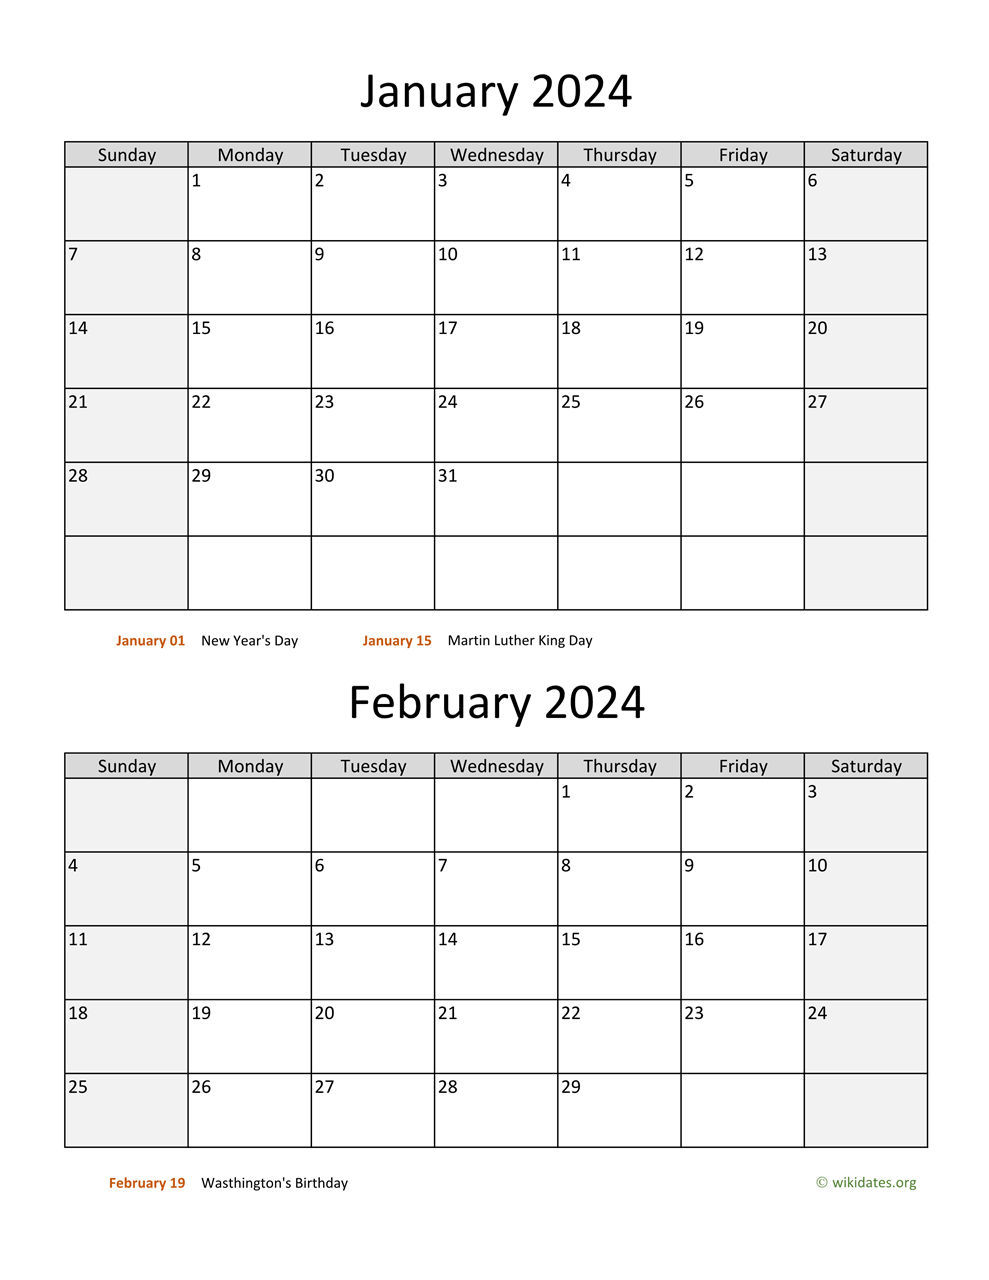 January And February 2024 Calendar | Wikidates for January February Calendar 2024 Printable